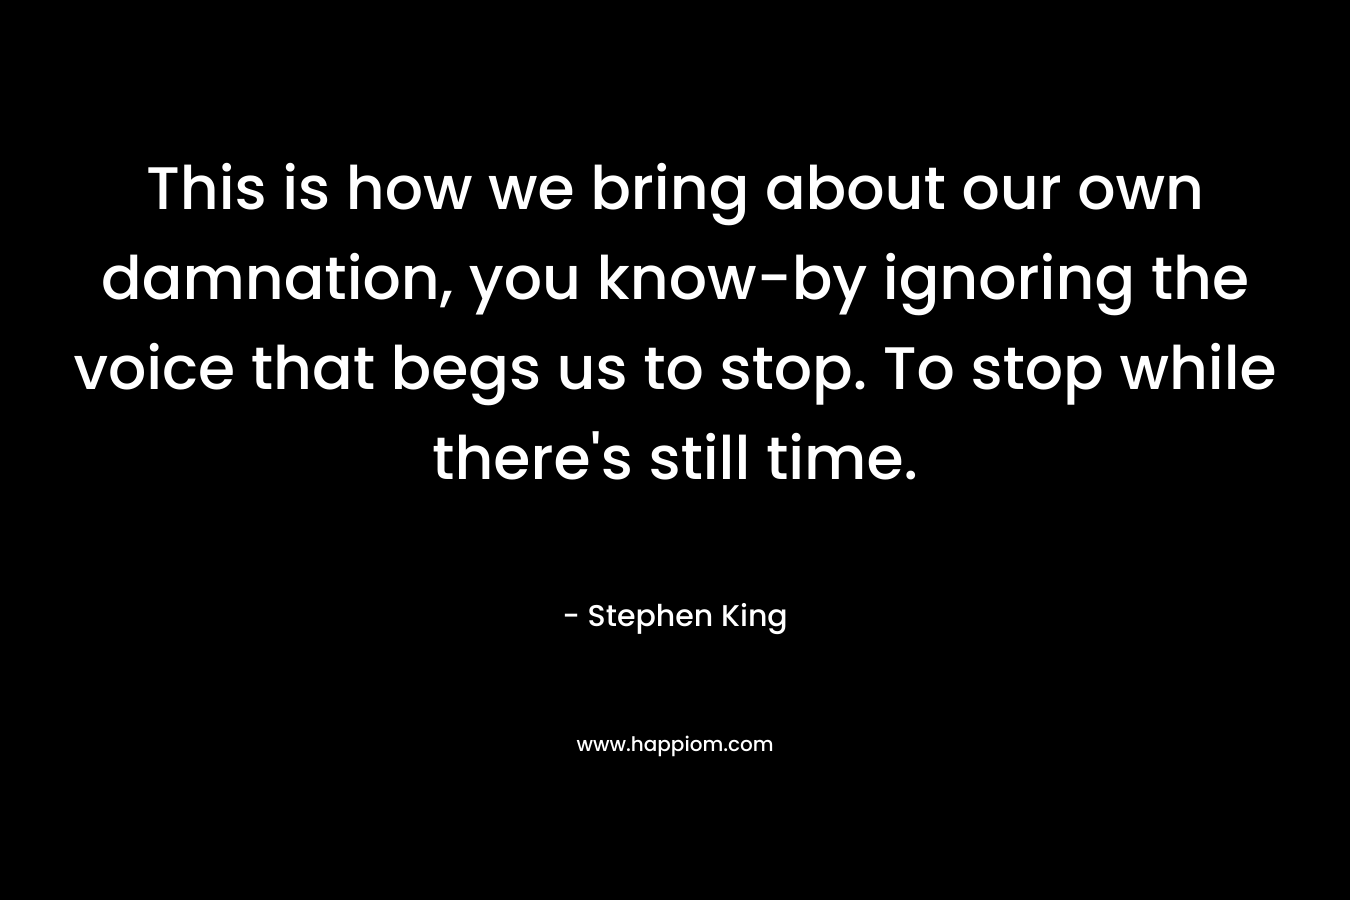 This is how we bring about our own damnation, you know-by ignoring the voice that begs us to stop. To stop while there’s still time. – Stephen King